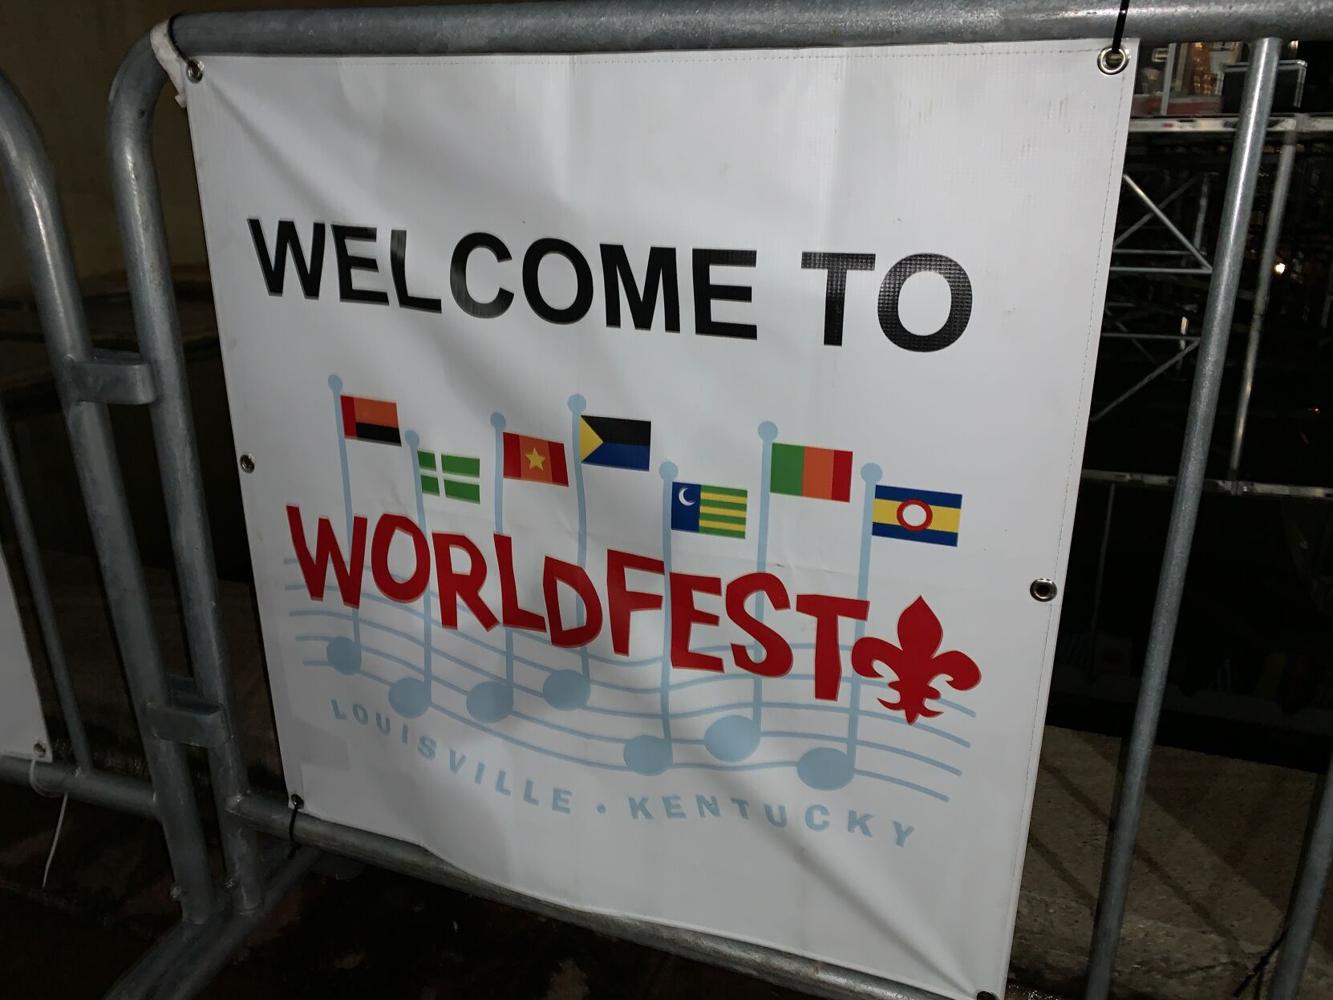 WorldFest brings the best of Louisville's diverse cultures to one place